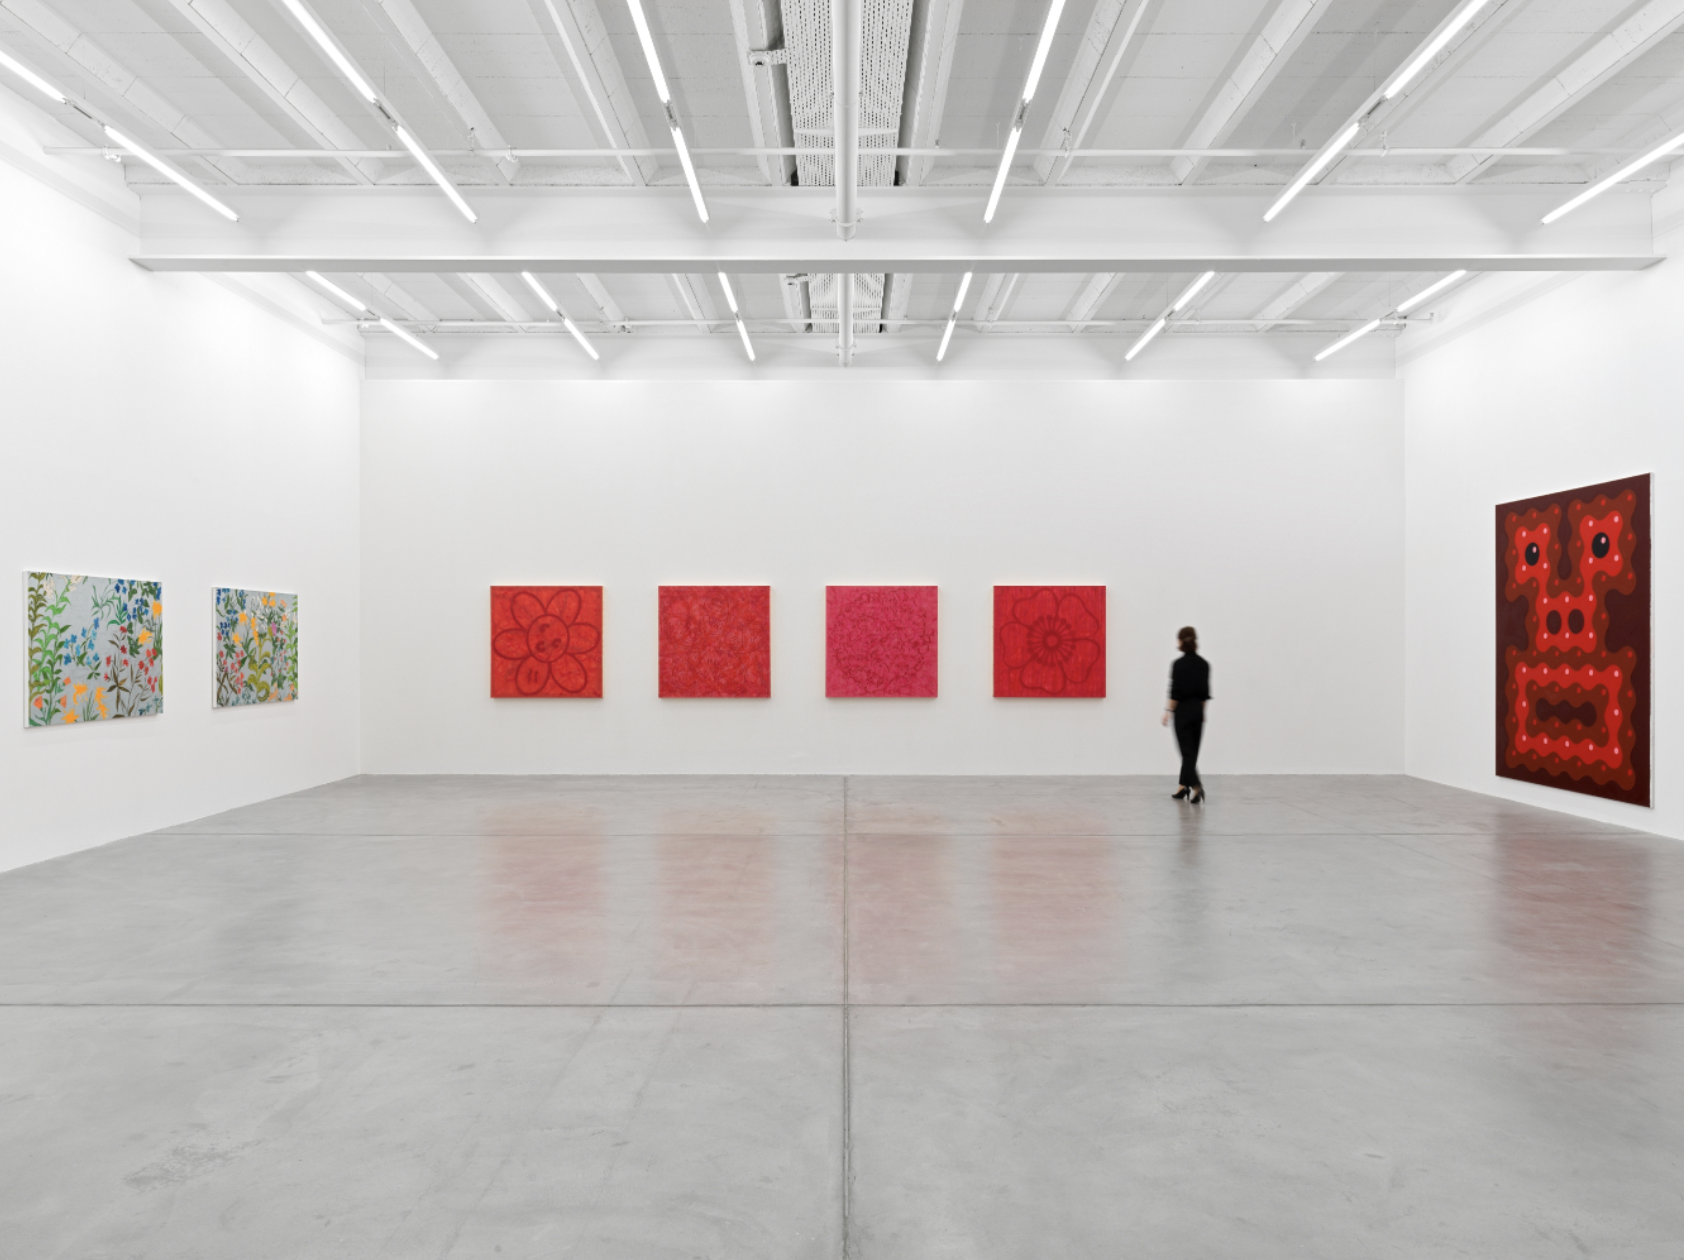 Installation view with works by Laura Langer, Mitchell Anderson, and Anton Bruhin